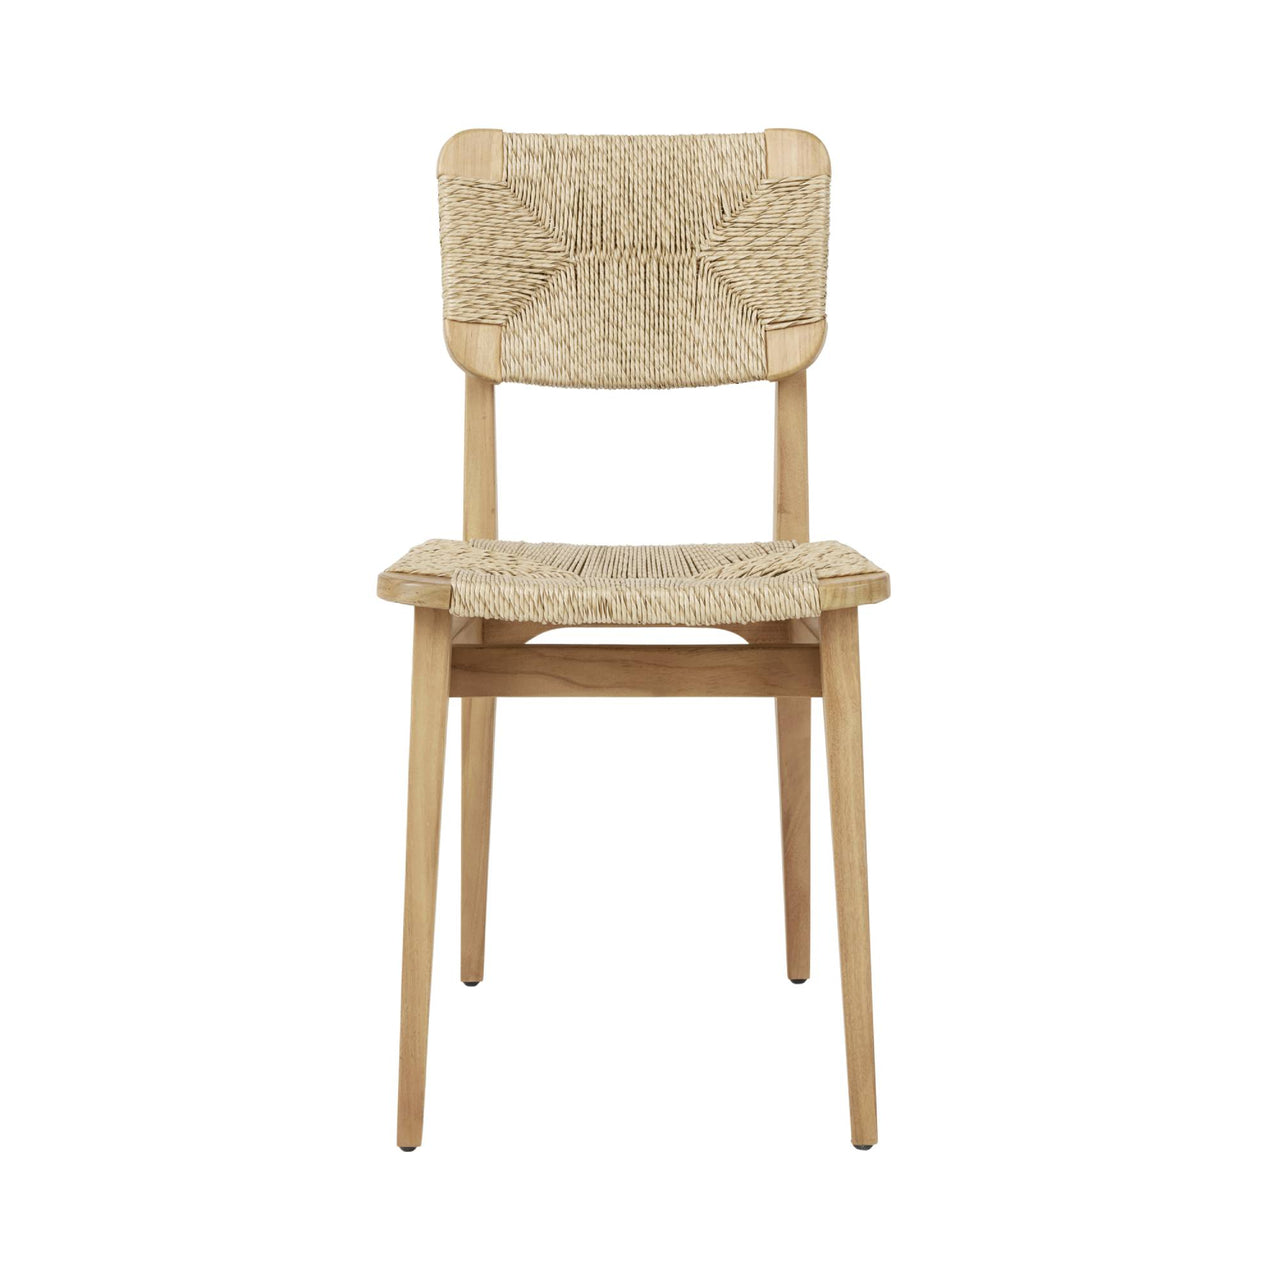 C-Dining Chair: Outdoor